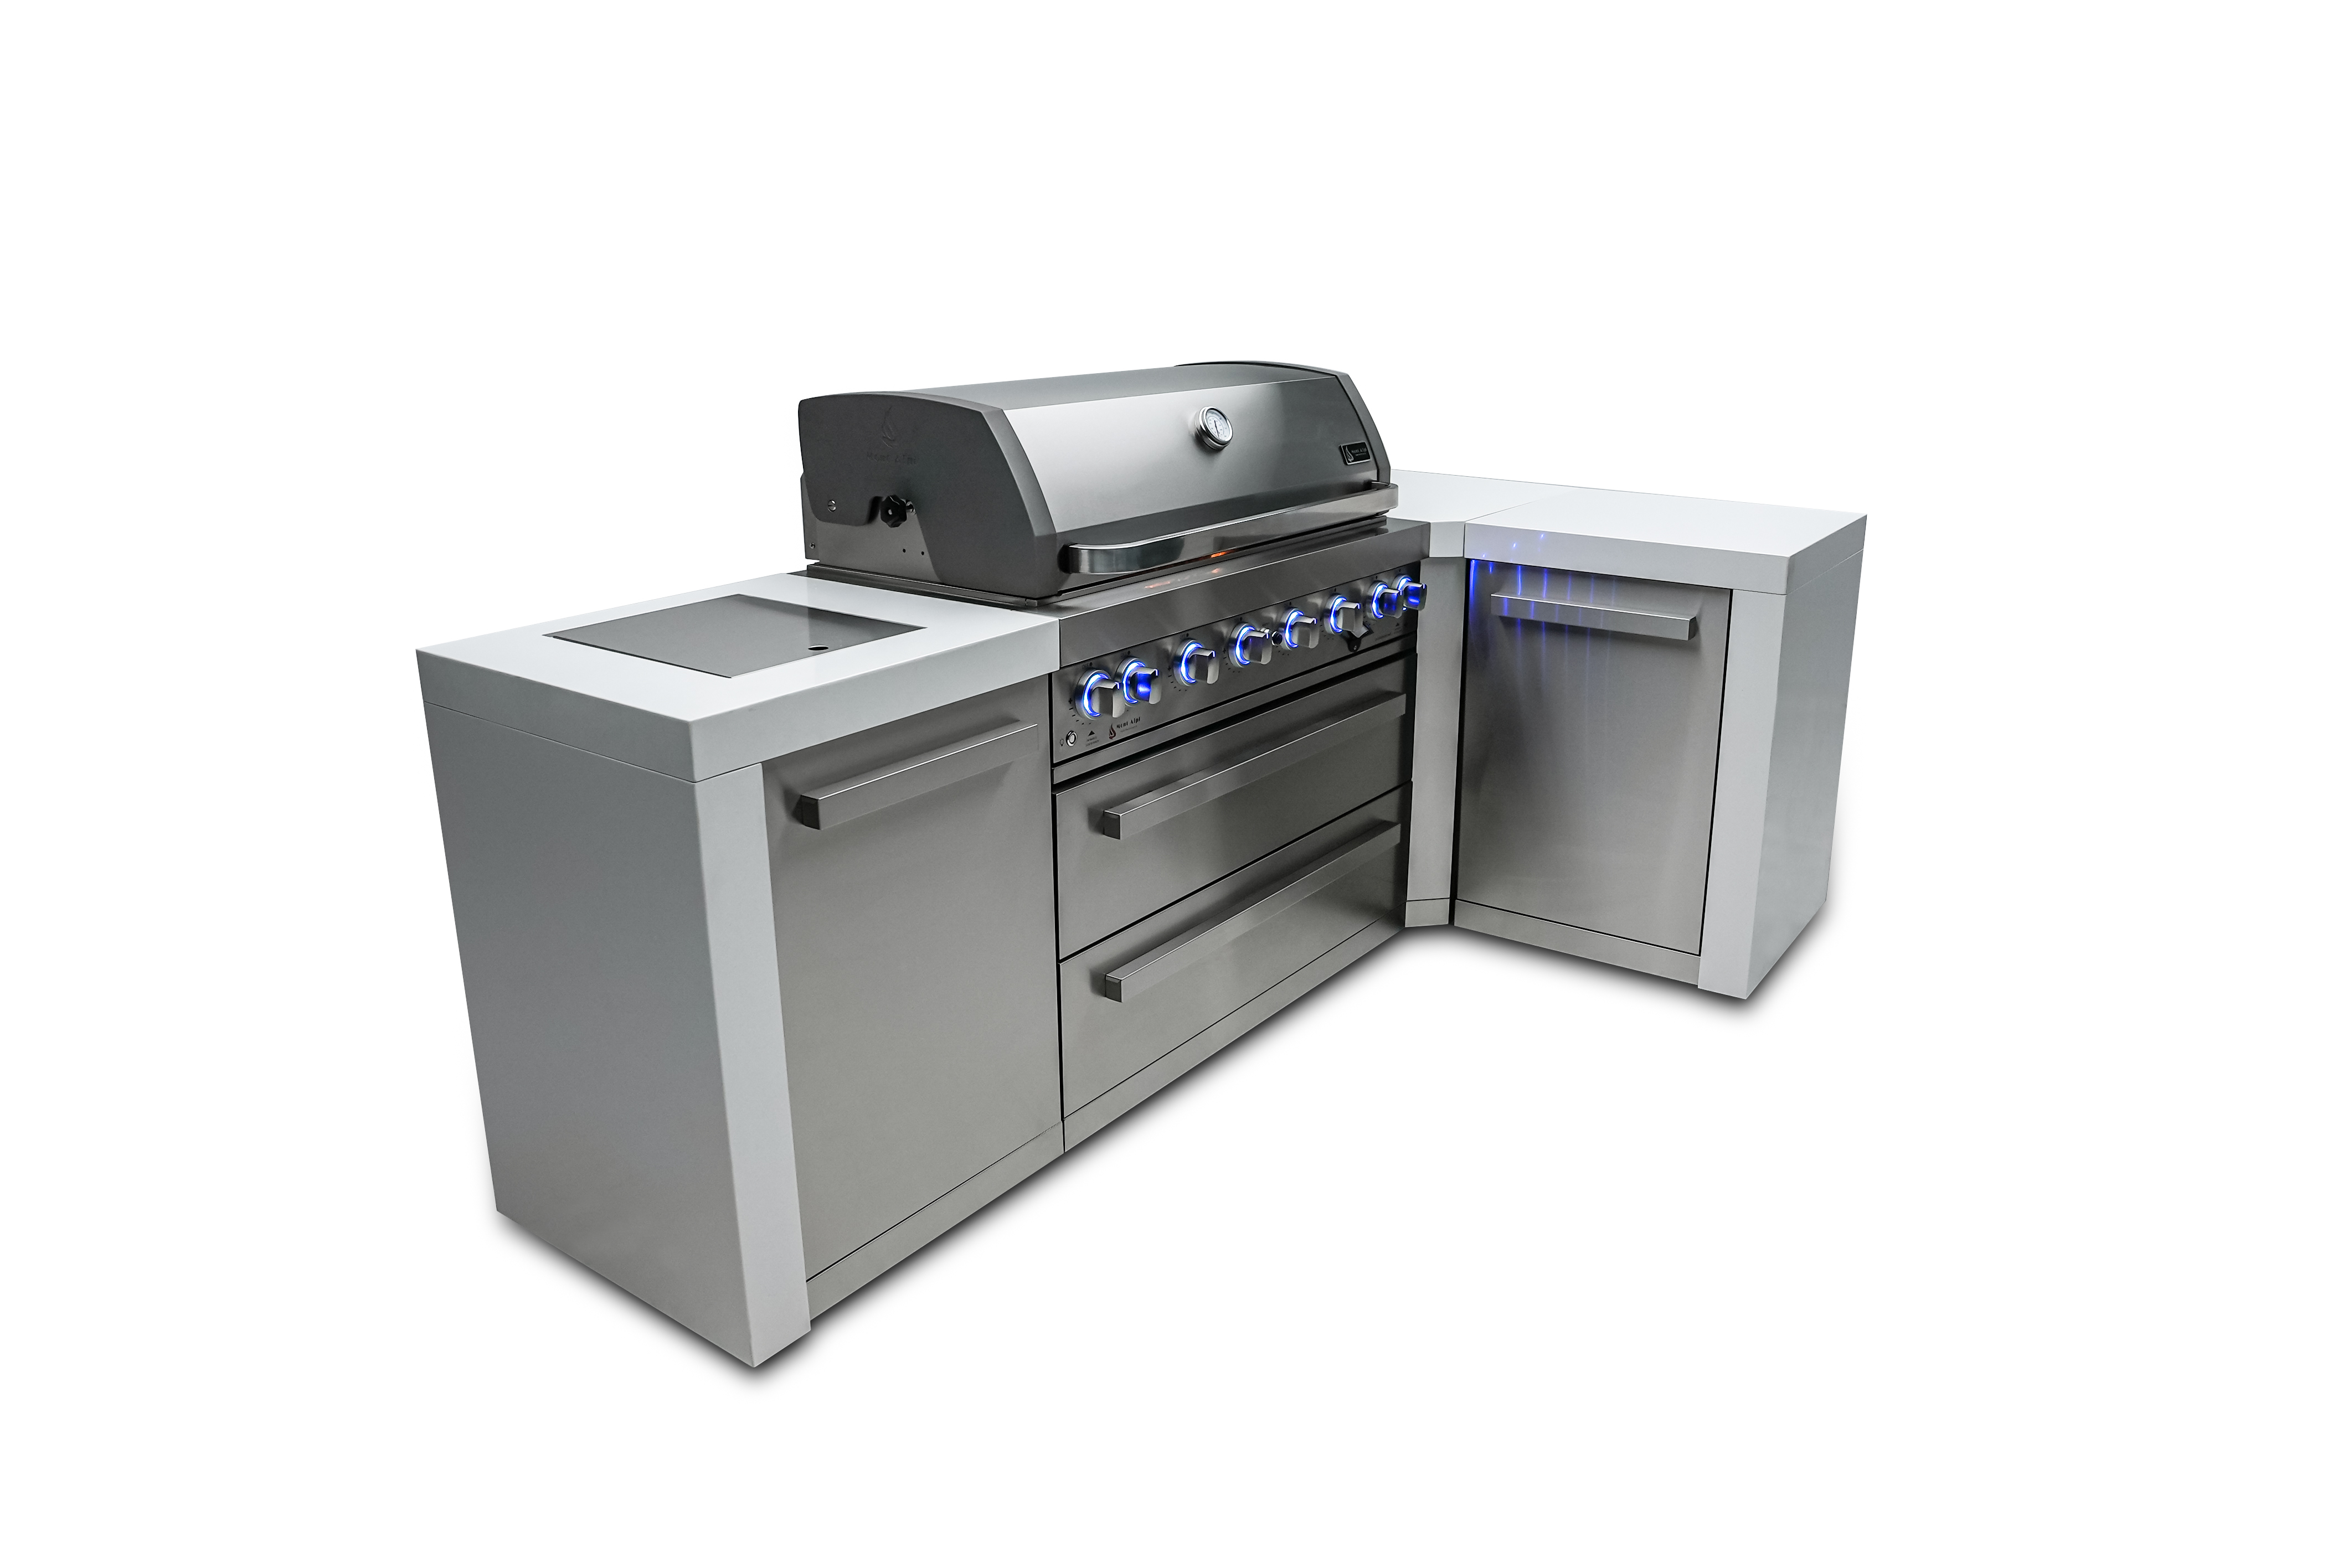 Mont Alpi 805 Deluxe Grill Island with 90 Degree Corner - image 1 of 8